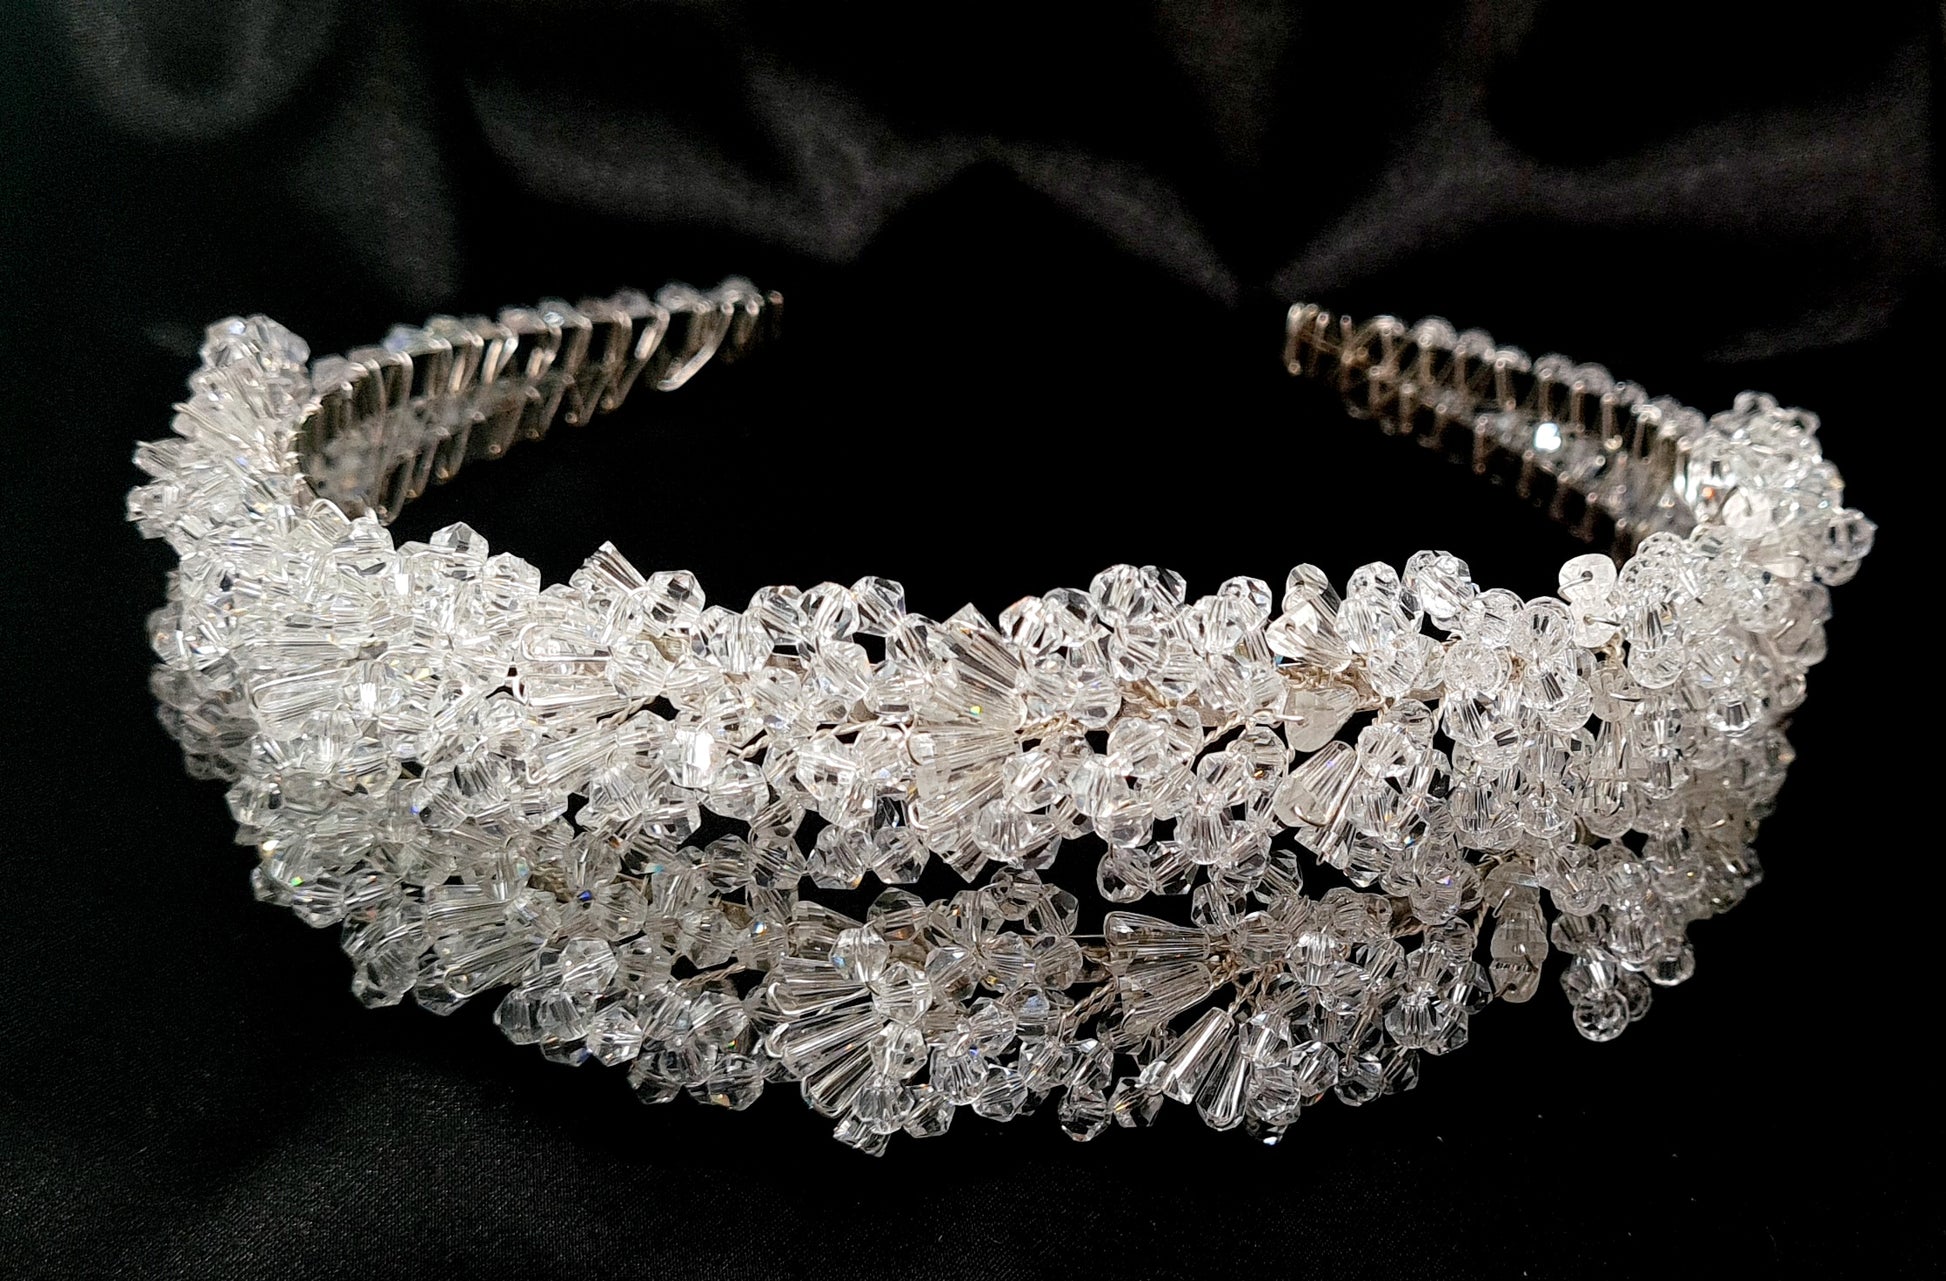 A close-up of a headband with crystals on a black background. The headband is made of a silver-colored metal and has an intricate design with crystals of different shapes and sizes. The crystals are sparkling and reflect the light.